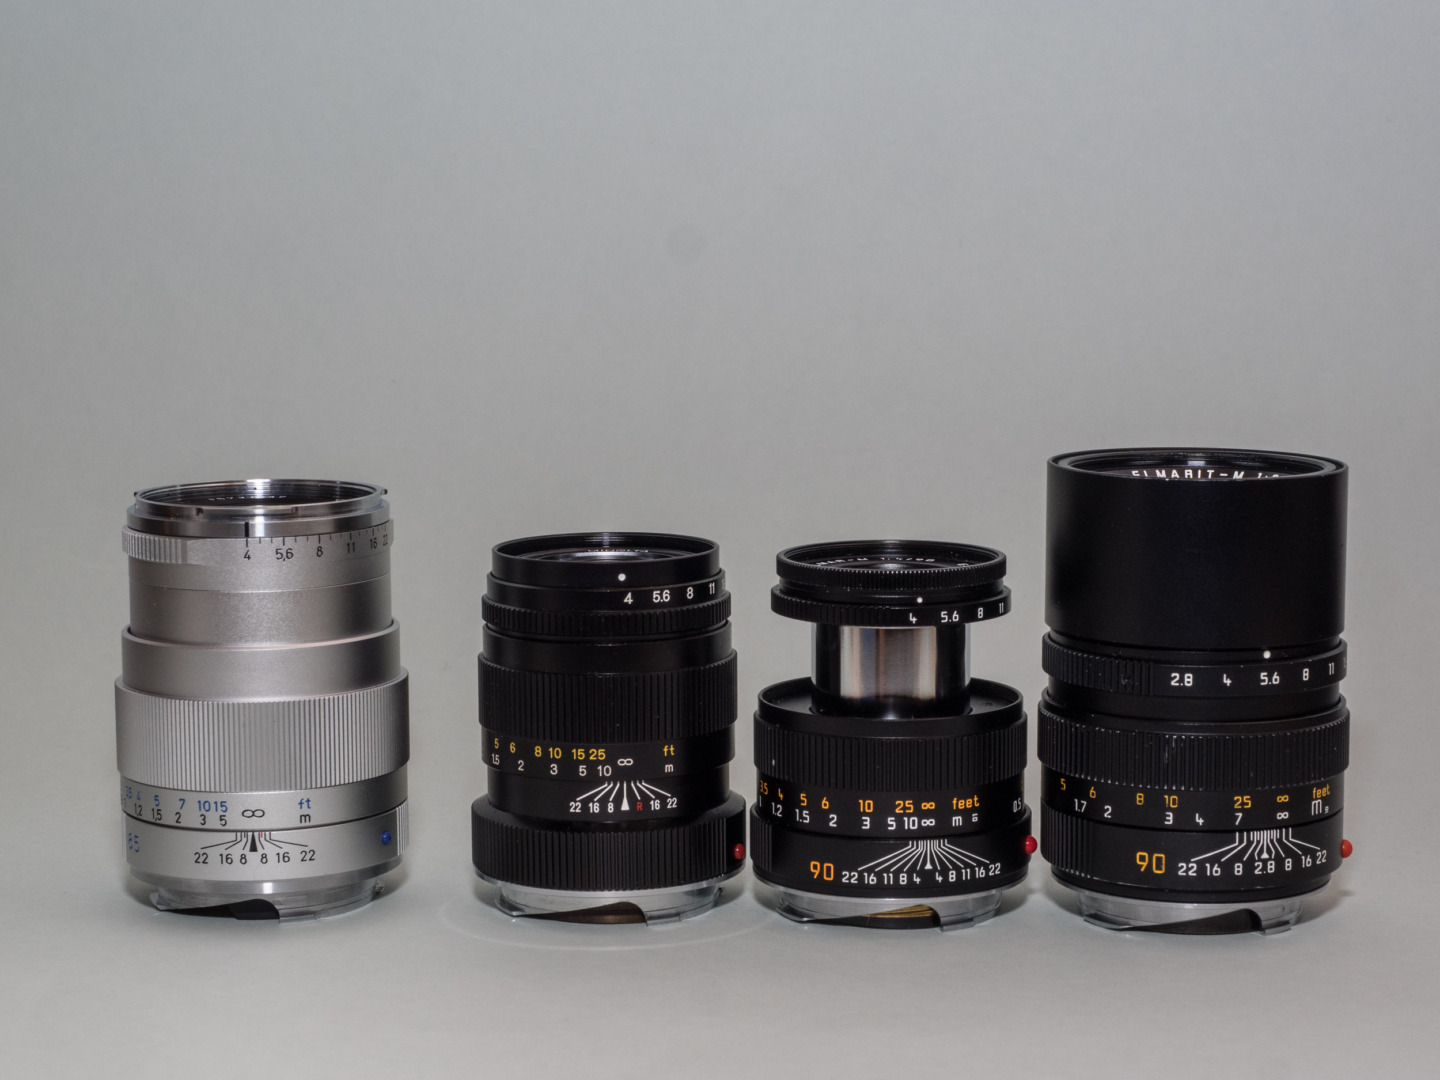 The Zeiss Tele-Tessar 85/4 has very stiff competition. Just to show some of the alternatives: Minolta Rokkor-M 90/4, Leica Macro-Elmar 90/4, Leica Elmarit 90/2.8 (from left). And do also factor in the 75 mm Summarit